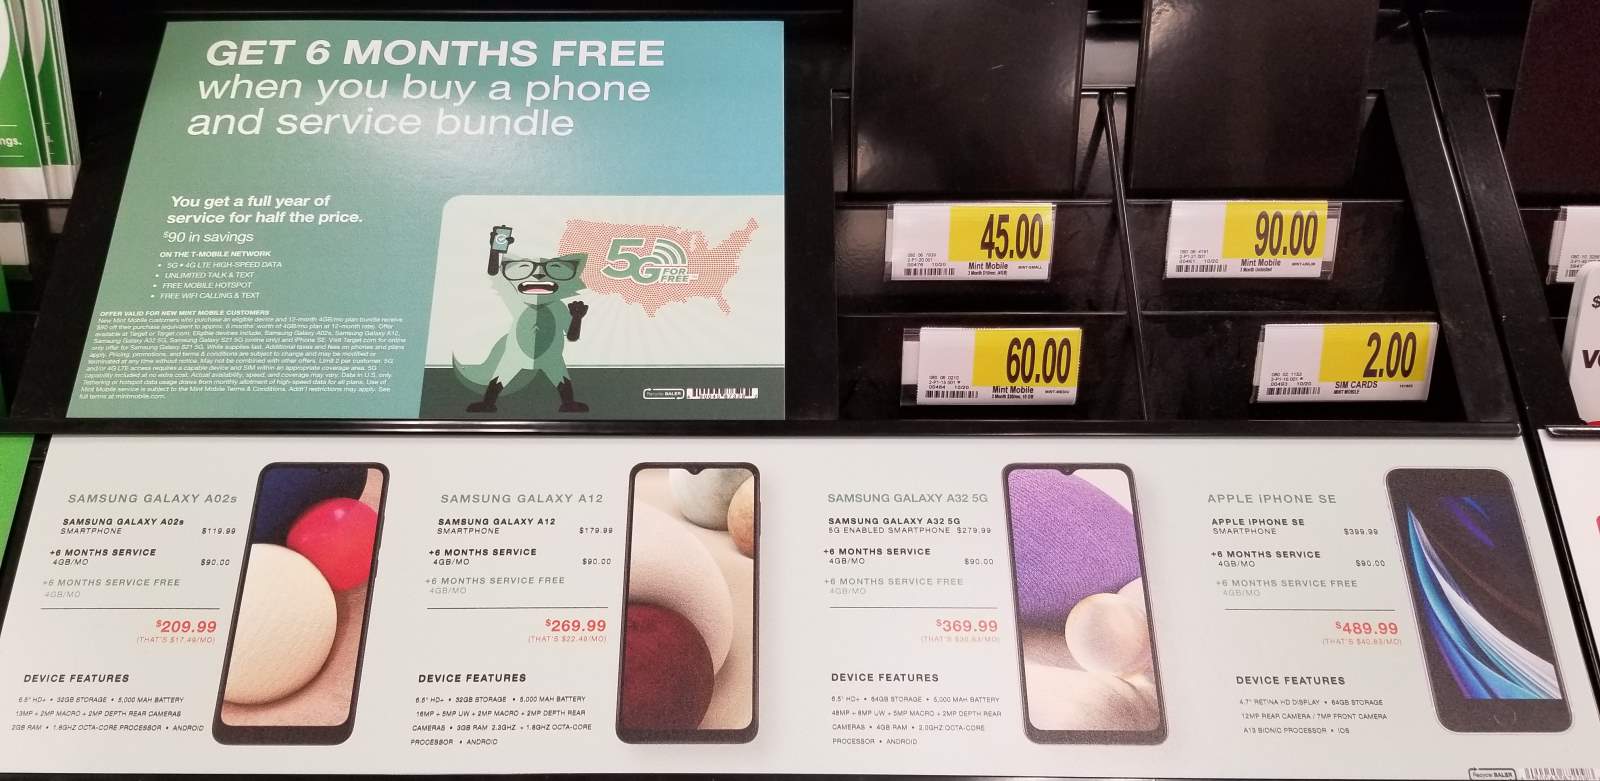 Mint Mobile Phone And Plan Bundle Options In Target Stores